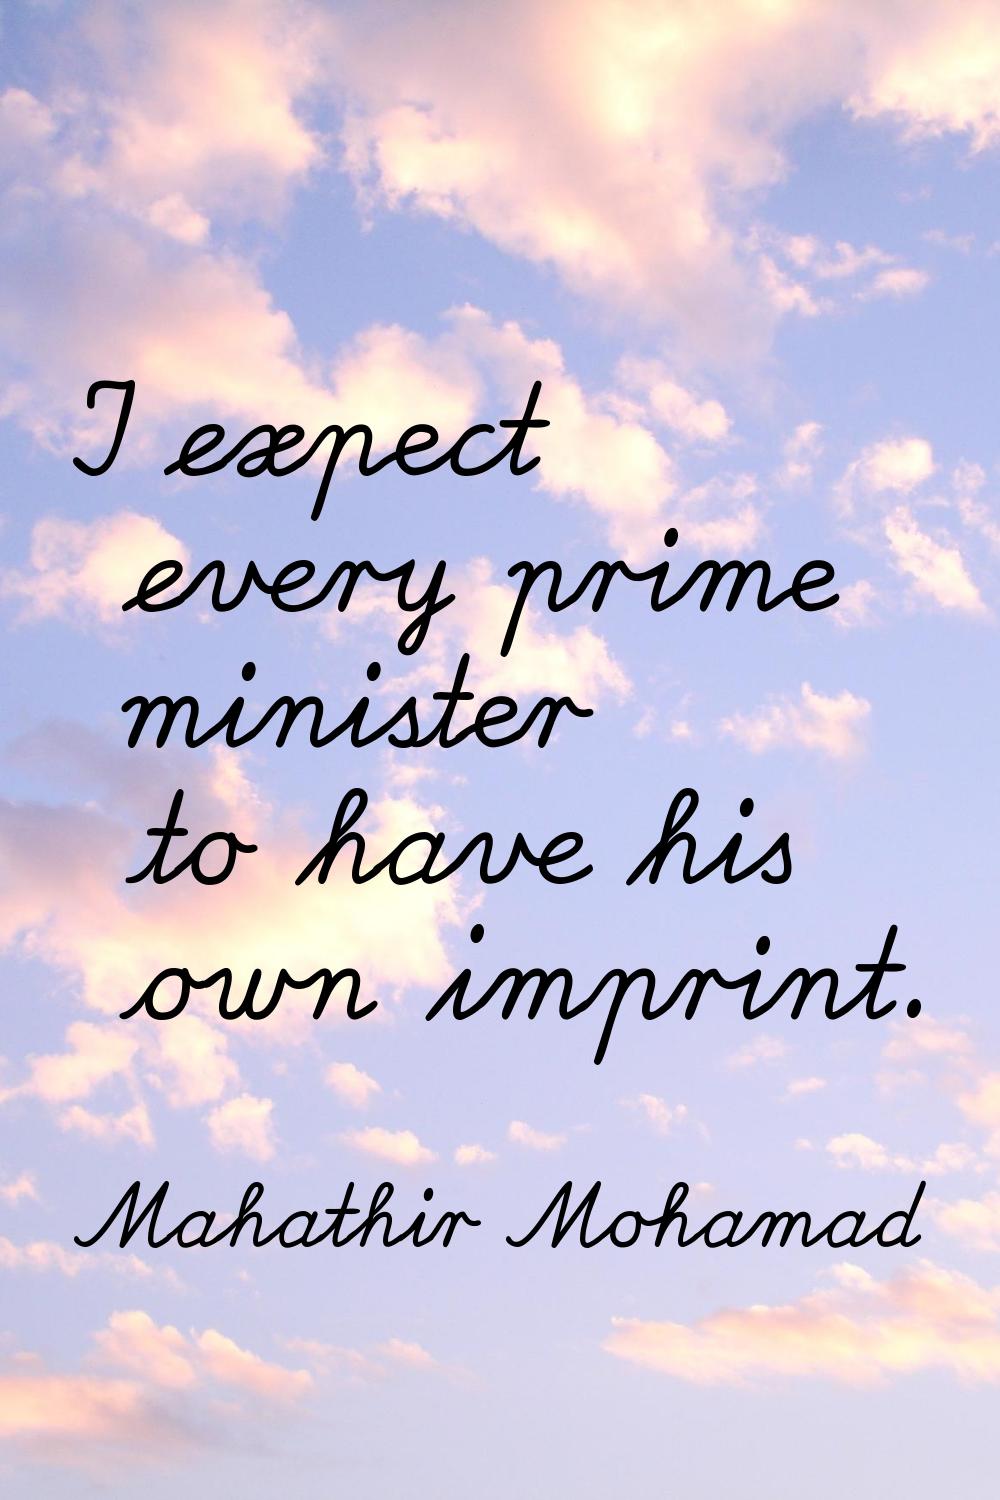 I expect every prime minister to have his own imprint.